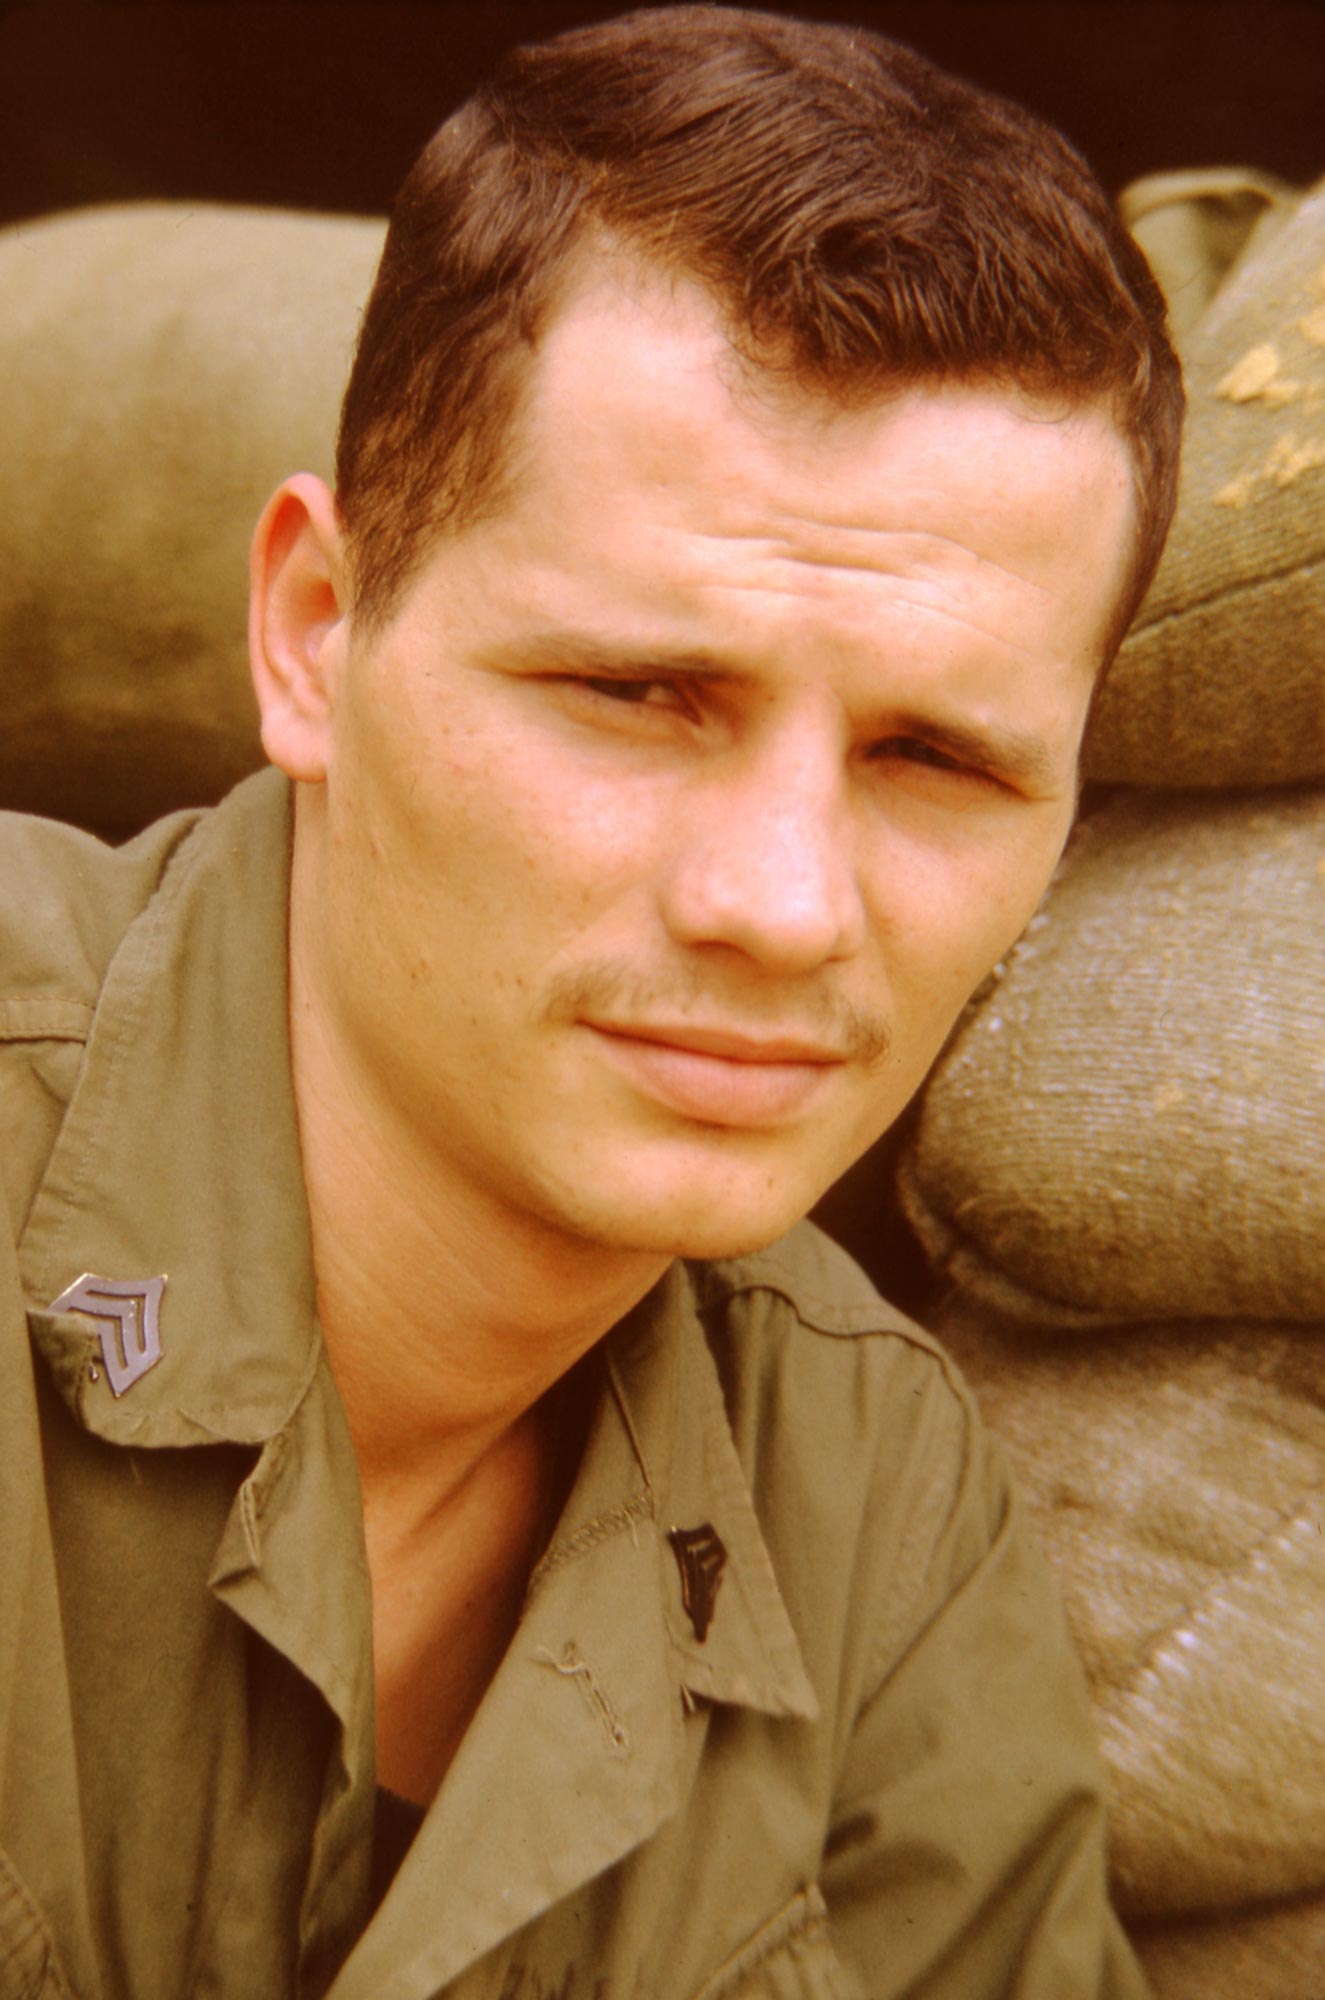 Headshot of a soldier in army fatigues with a mustache and a serious look facial expression